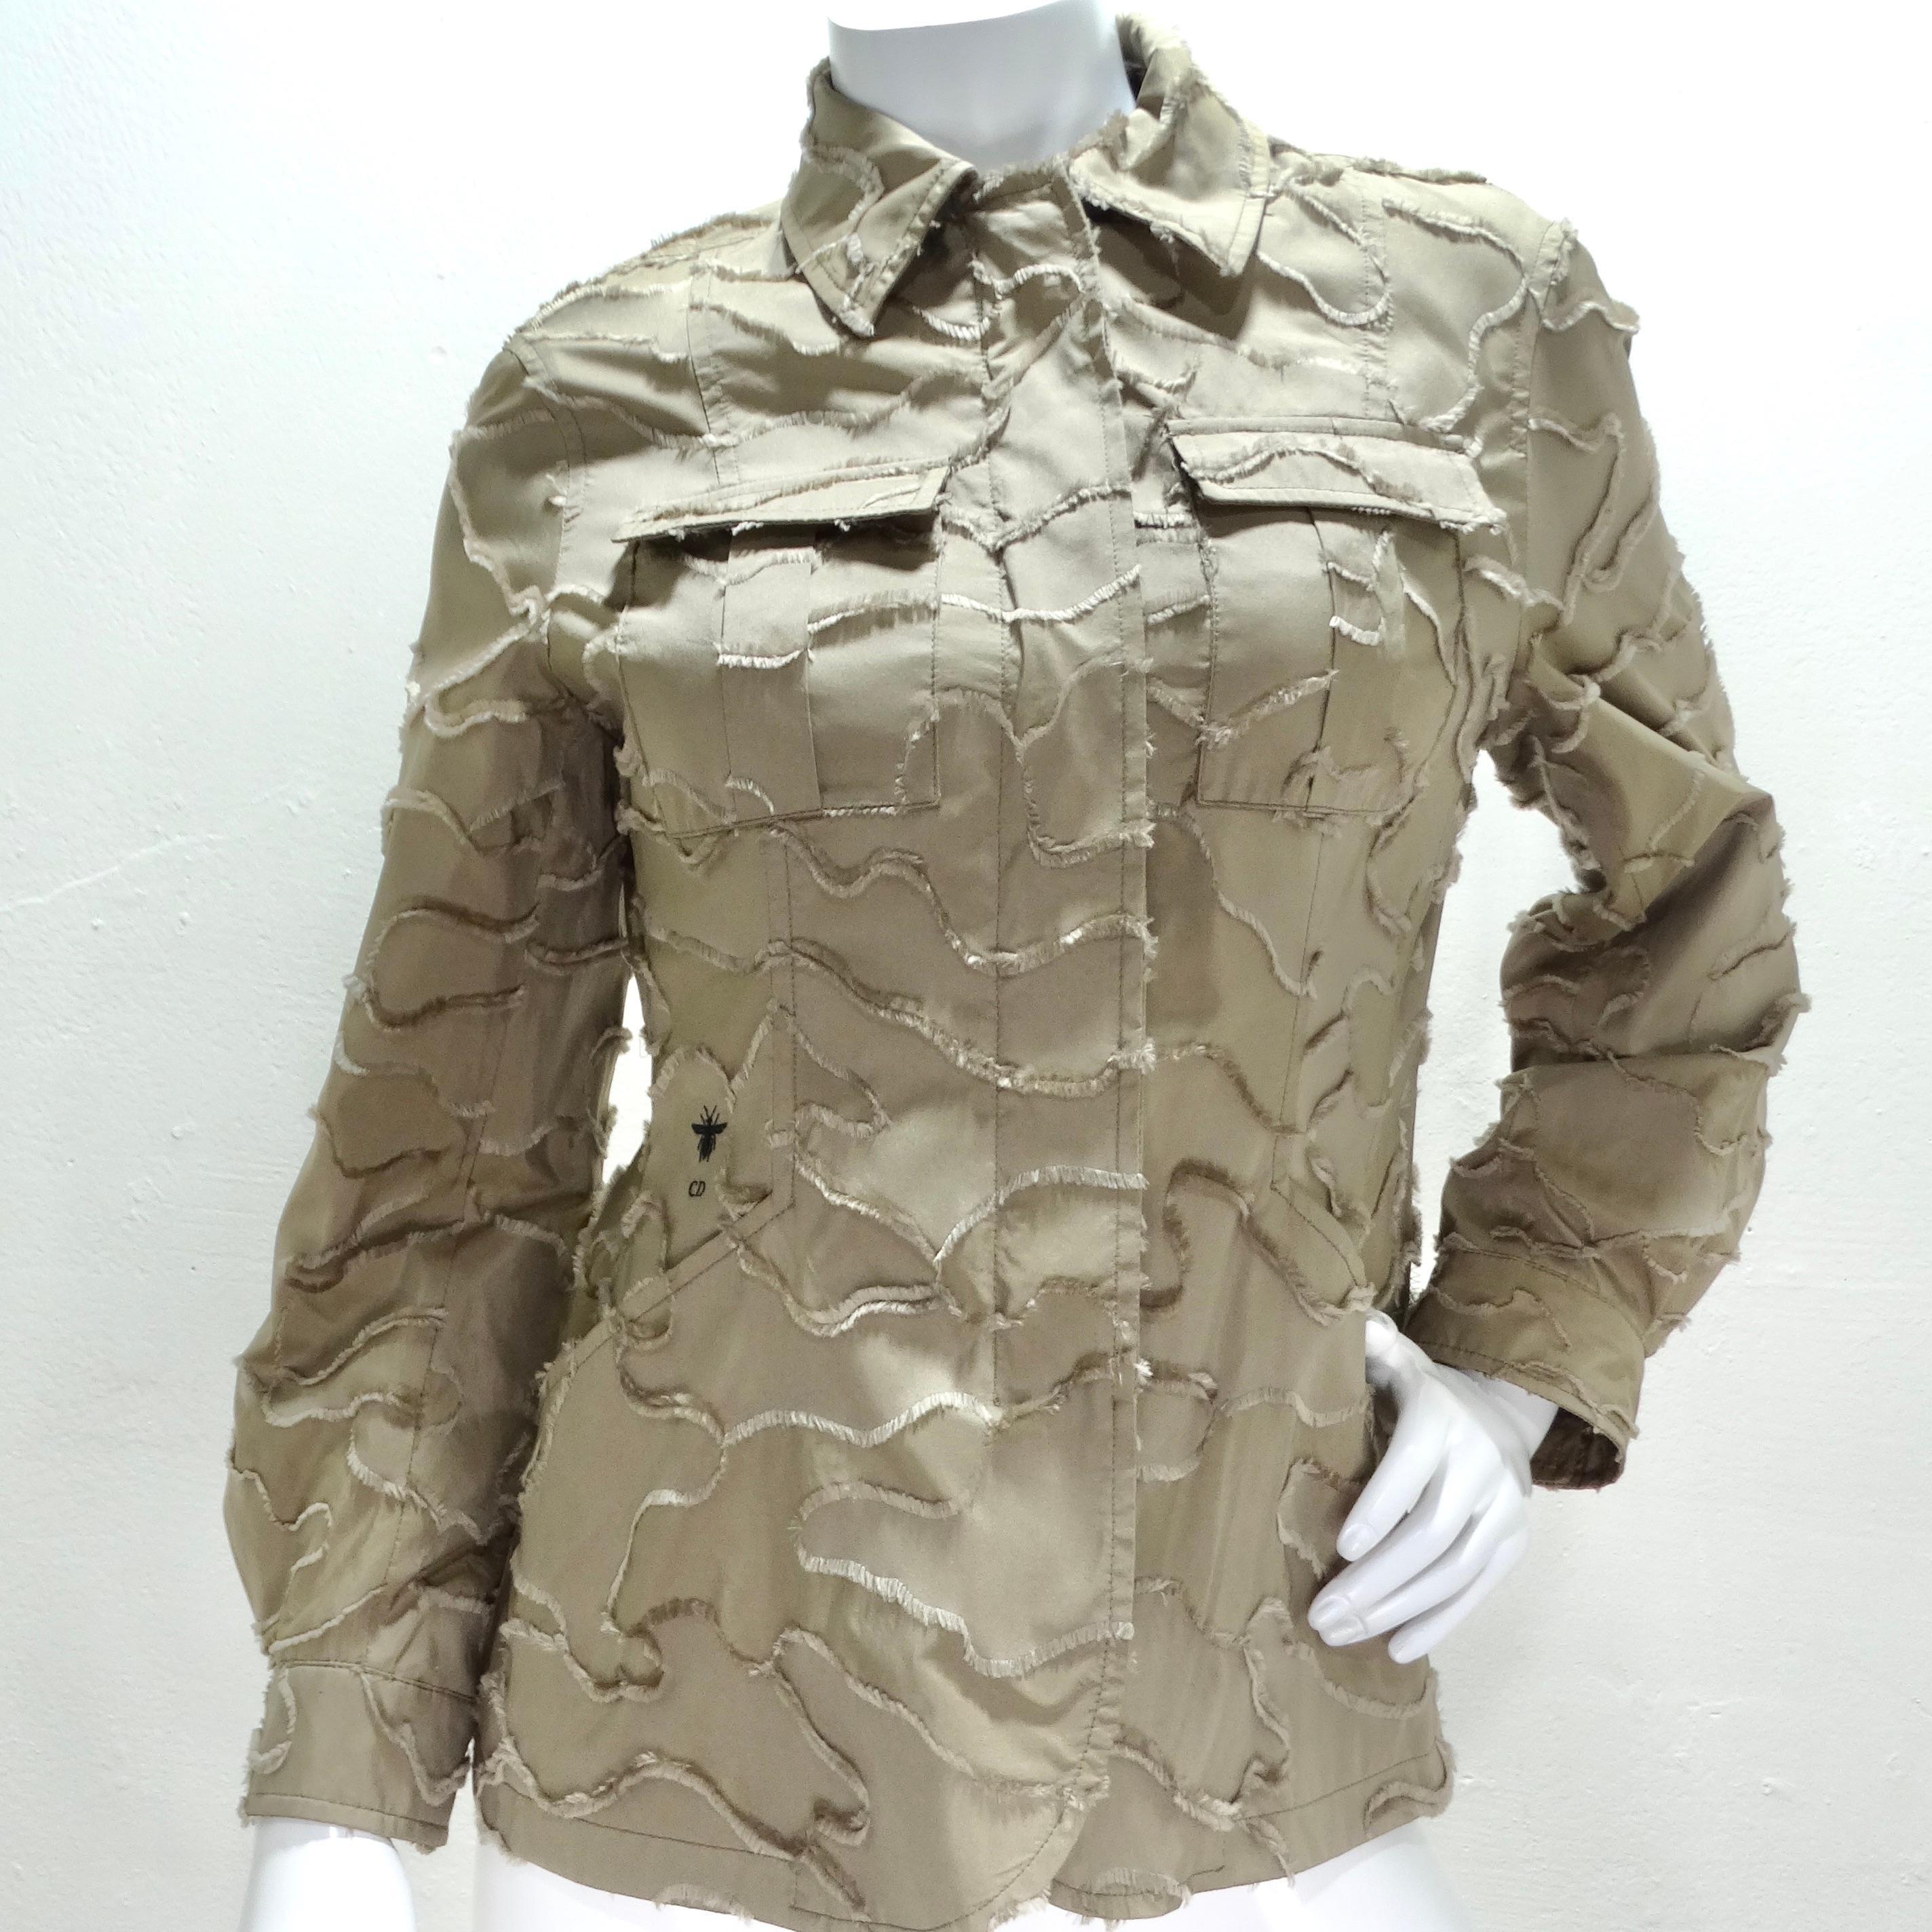 Elevate your style with this exquisite Christian Dior Safari Utility Jacket, Shorts, and Belt Set - a khaki 3-piece ensemble that exudes luxury and versatility. This ensemble features a textured camouflage-like print utility jacket, pleated